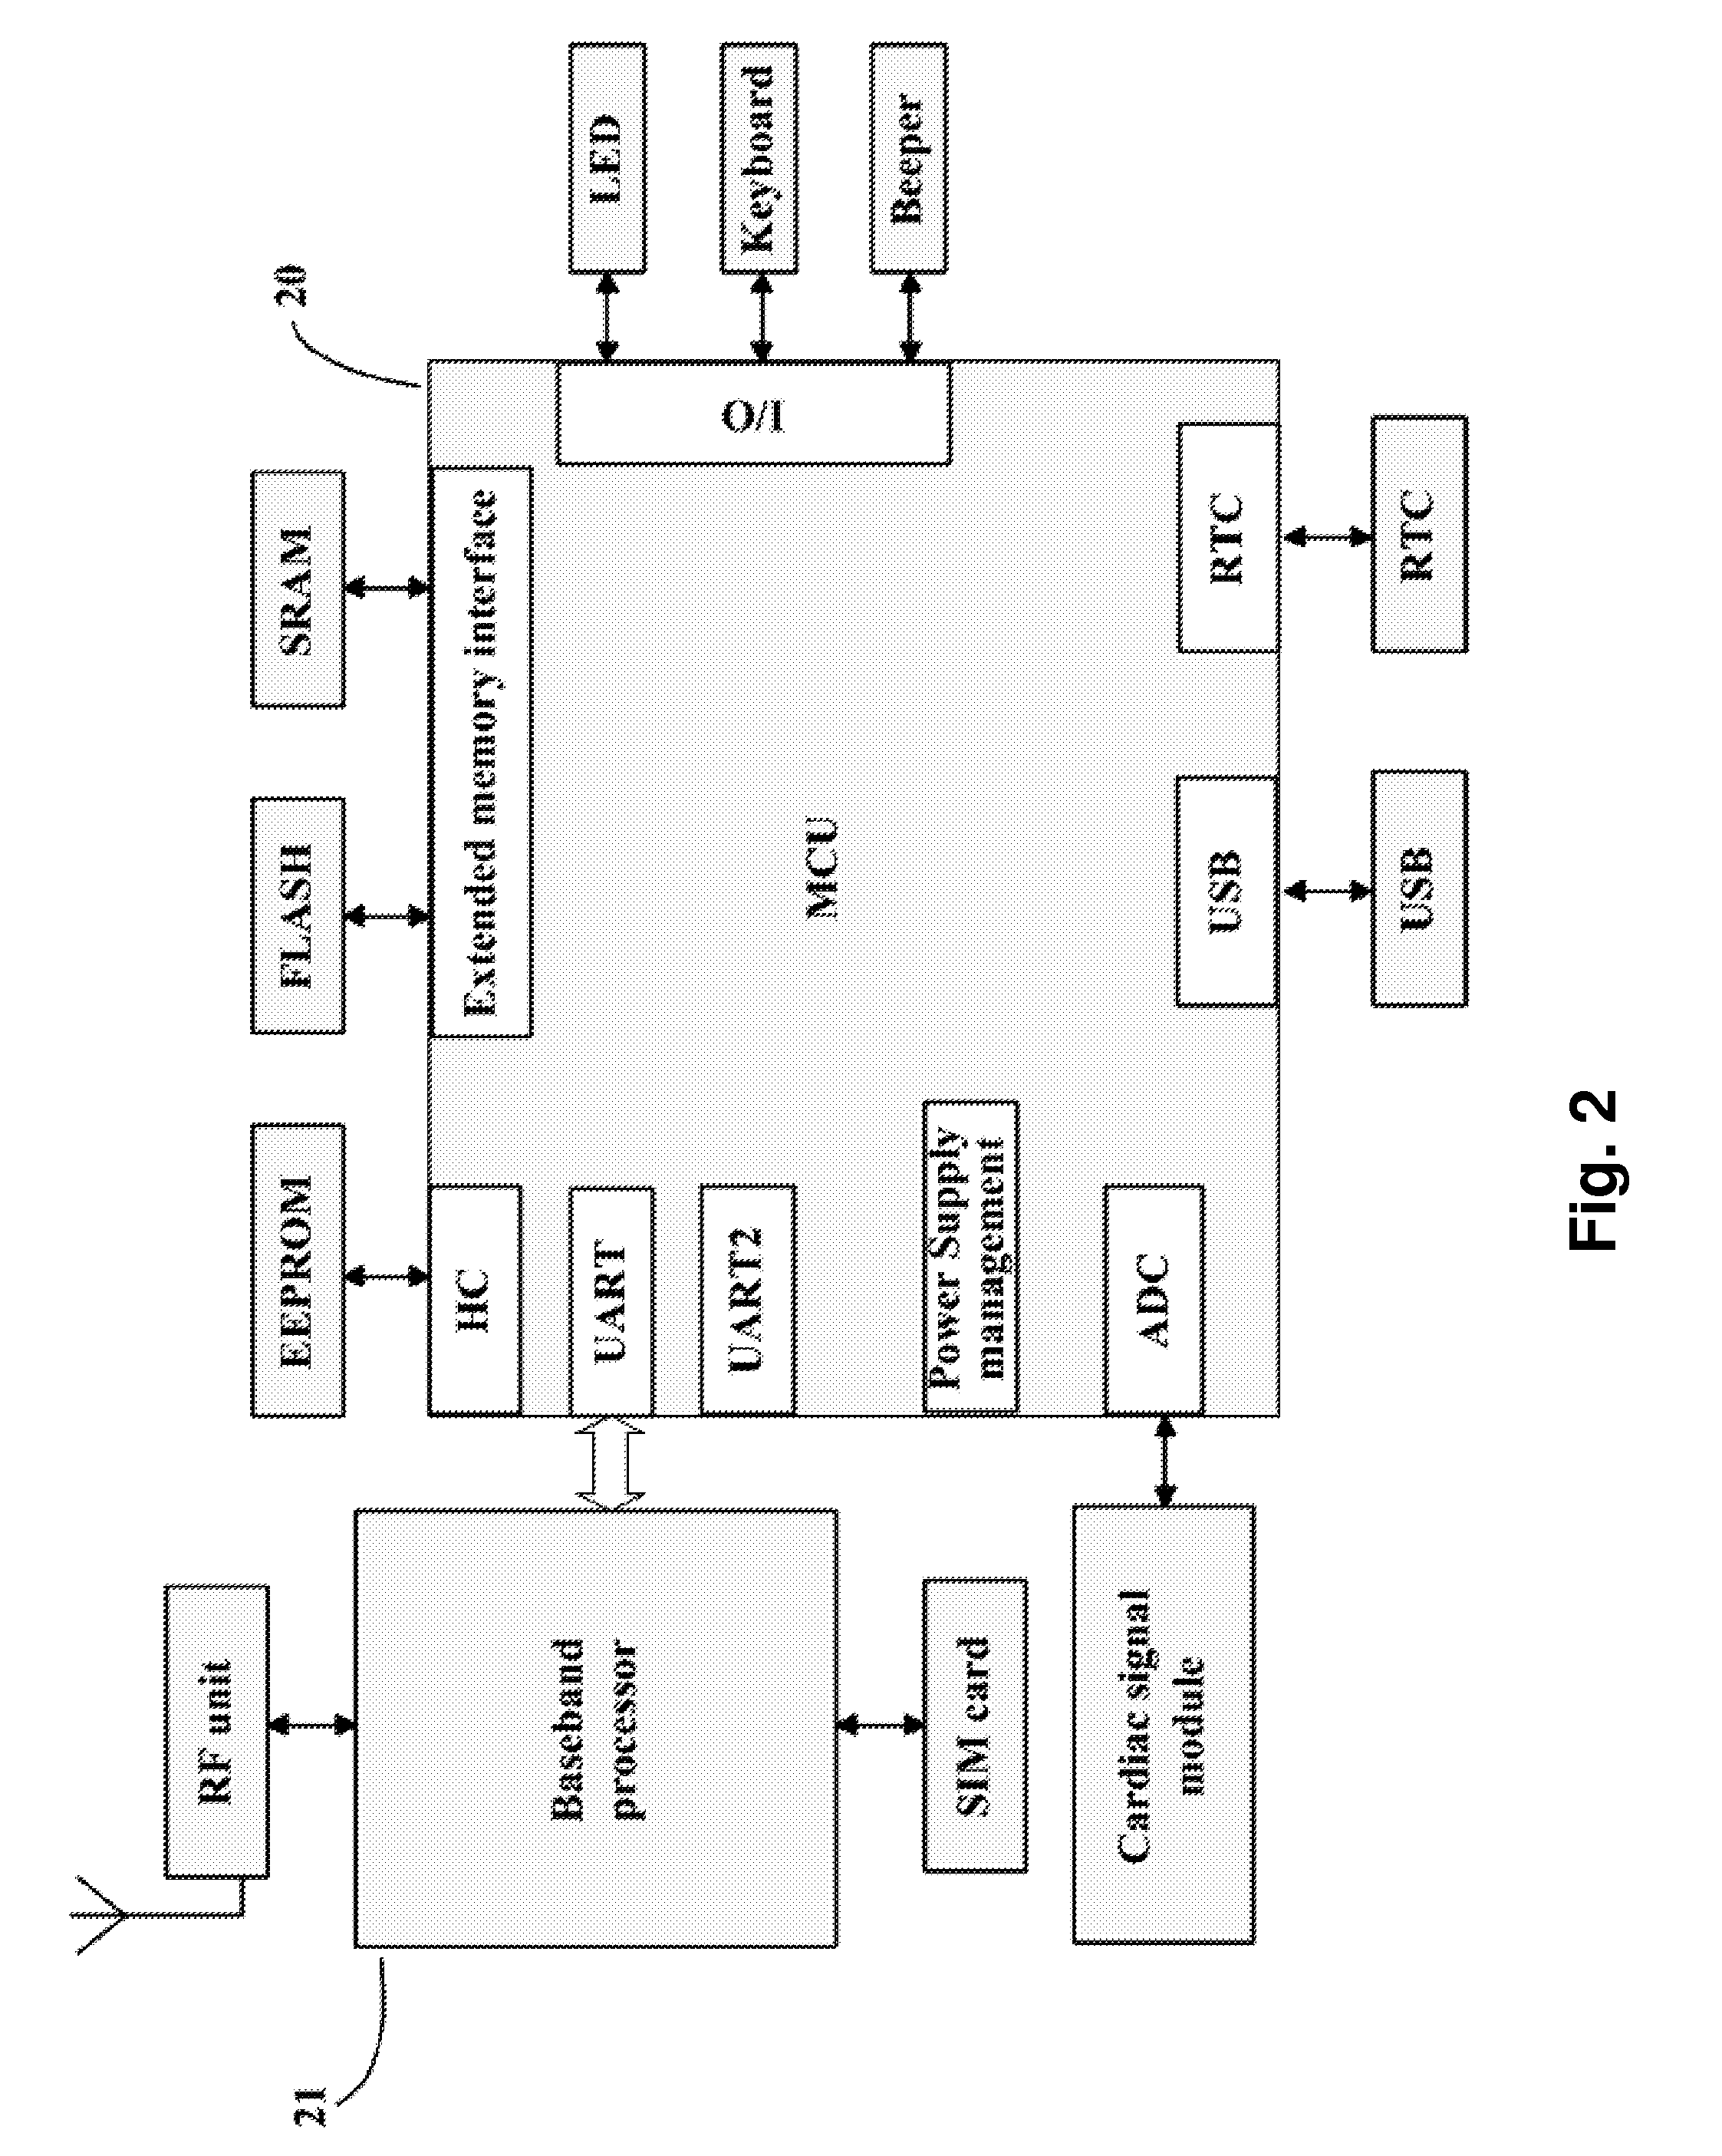 Mobile network terminal device and method for monitoring electrophysiological data and pathological image